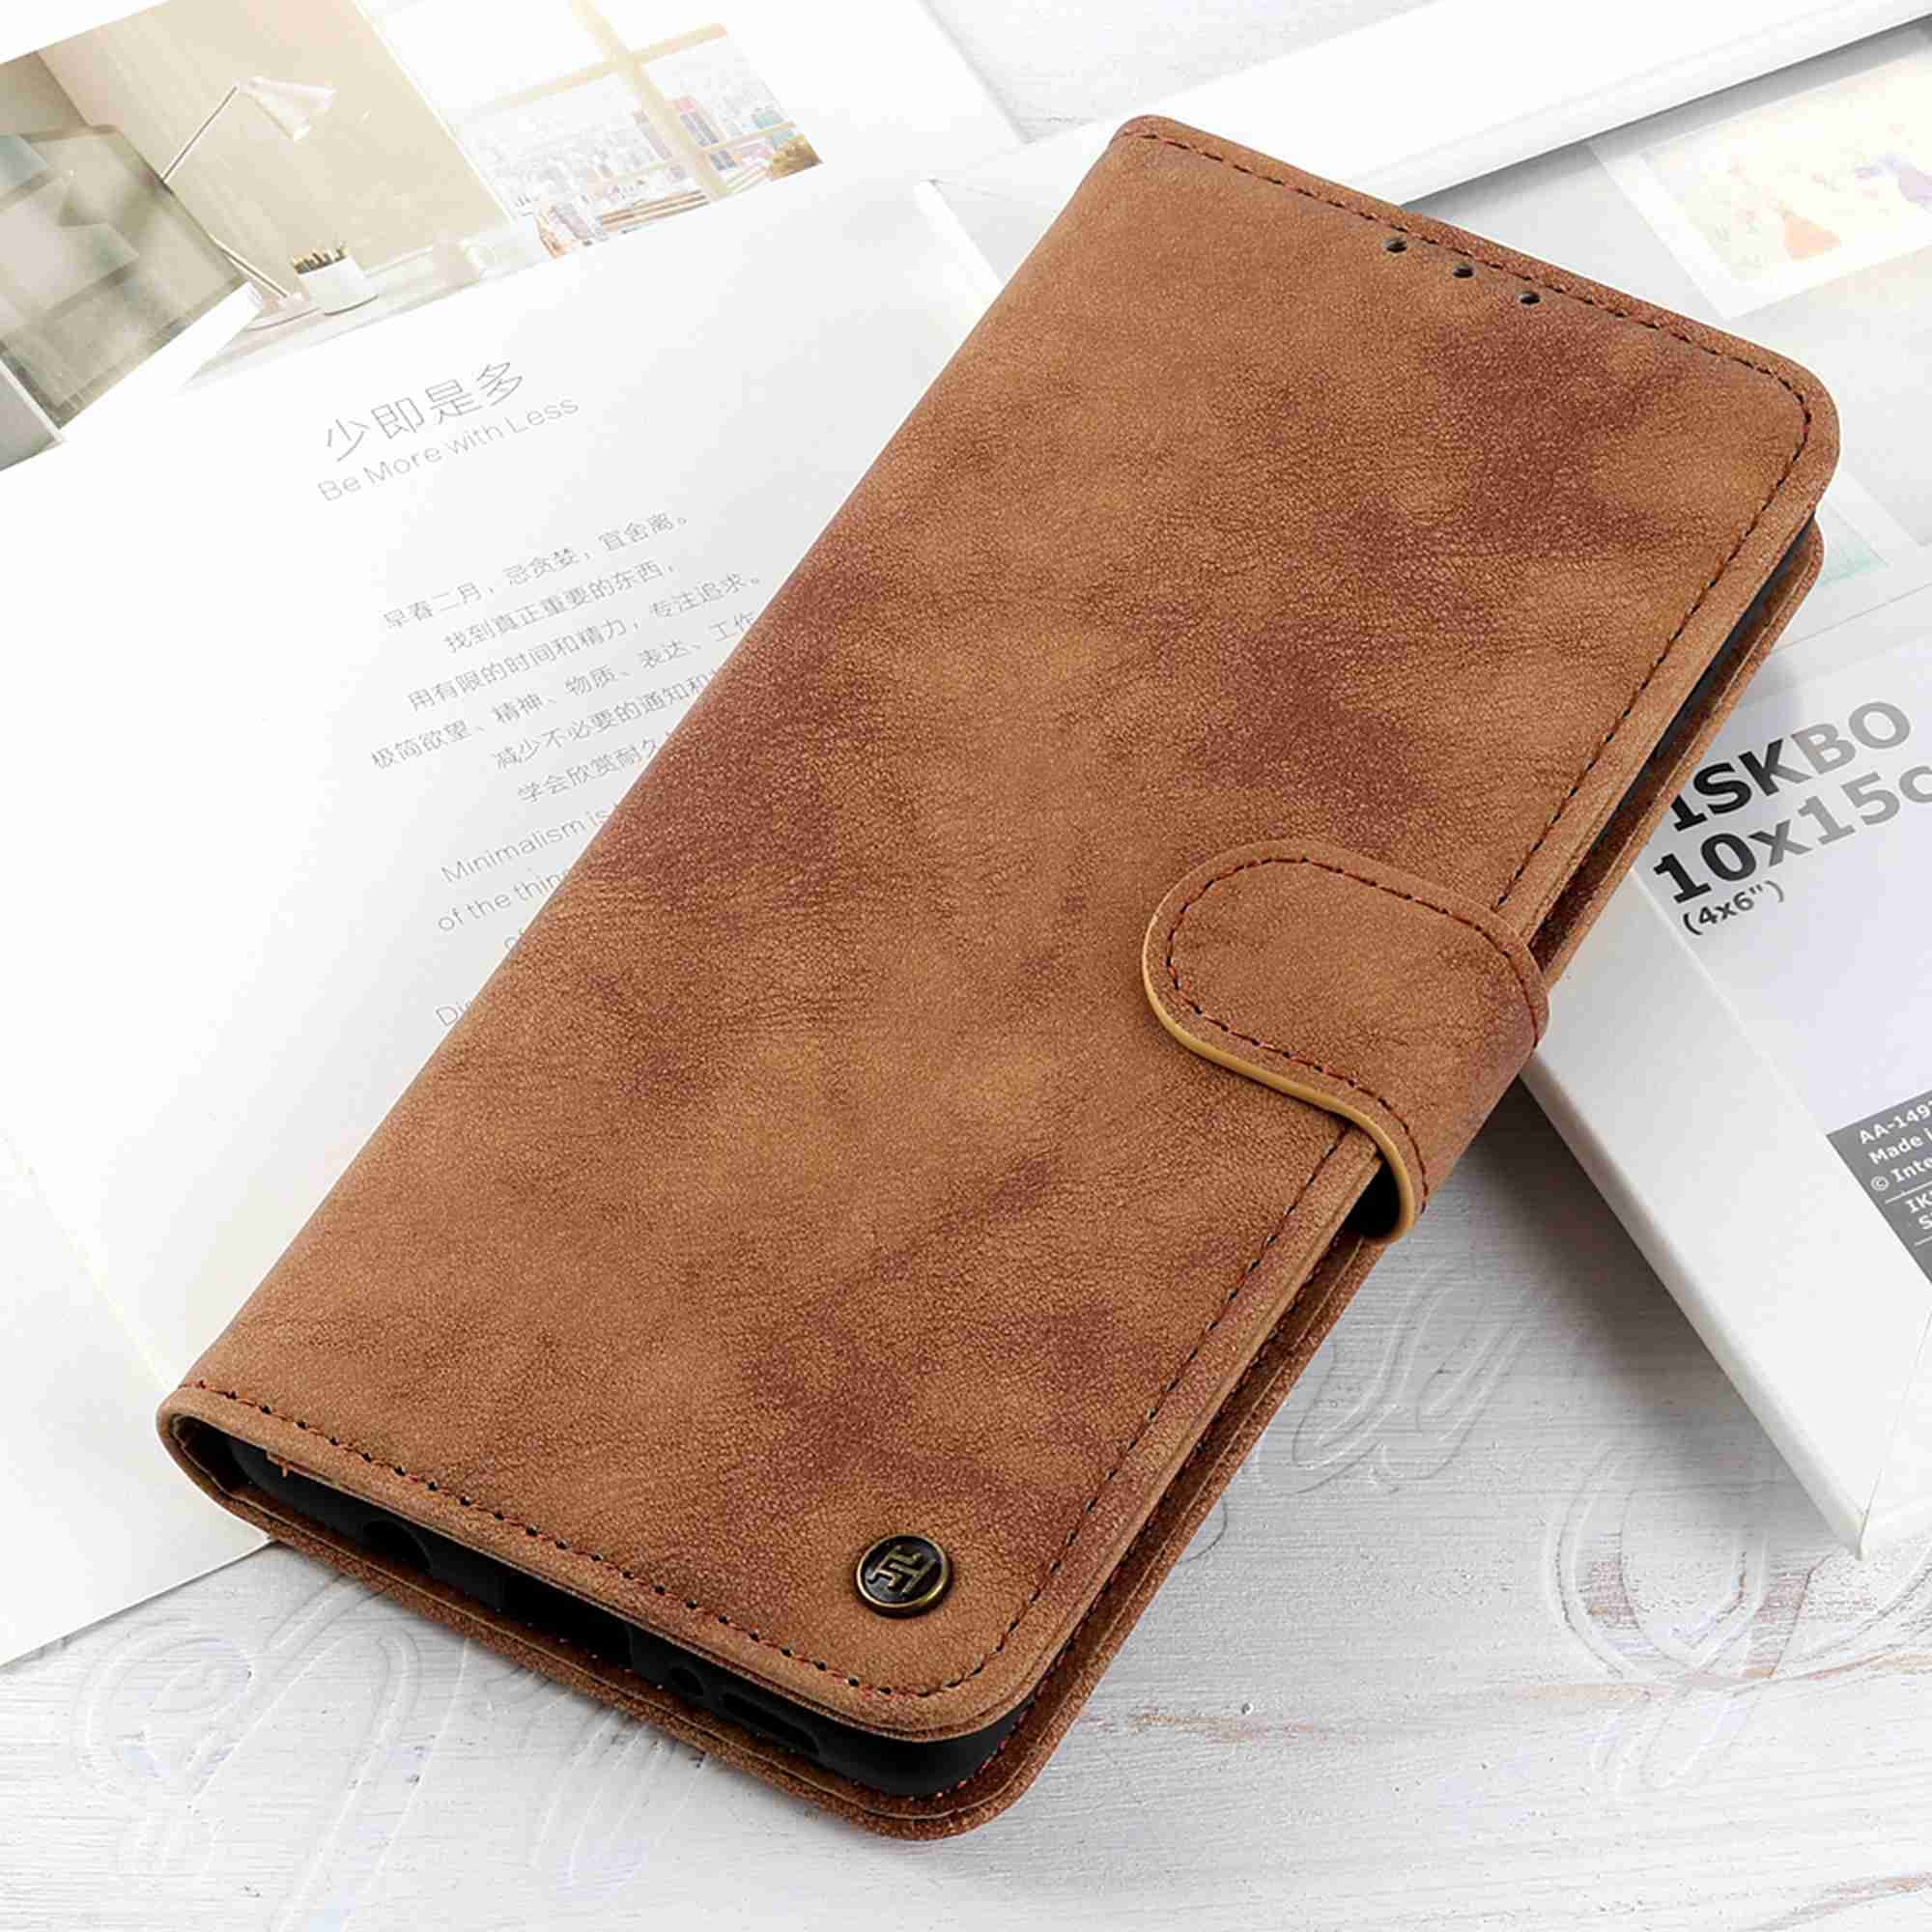 Phone Case for LG Series Flip Case Cover Shell Bumper Wallet 